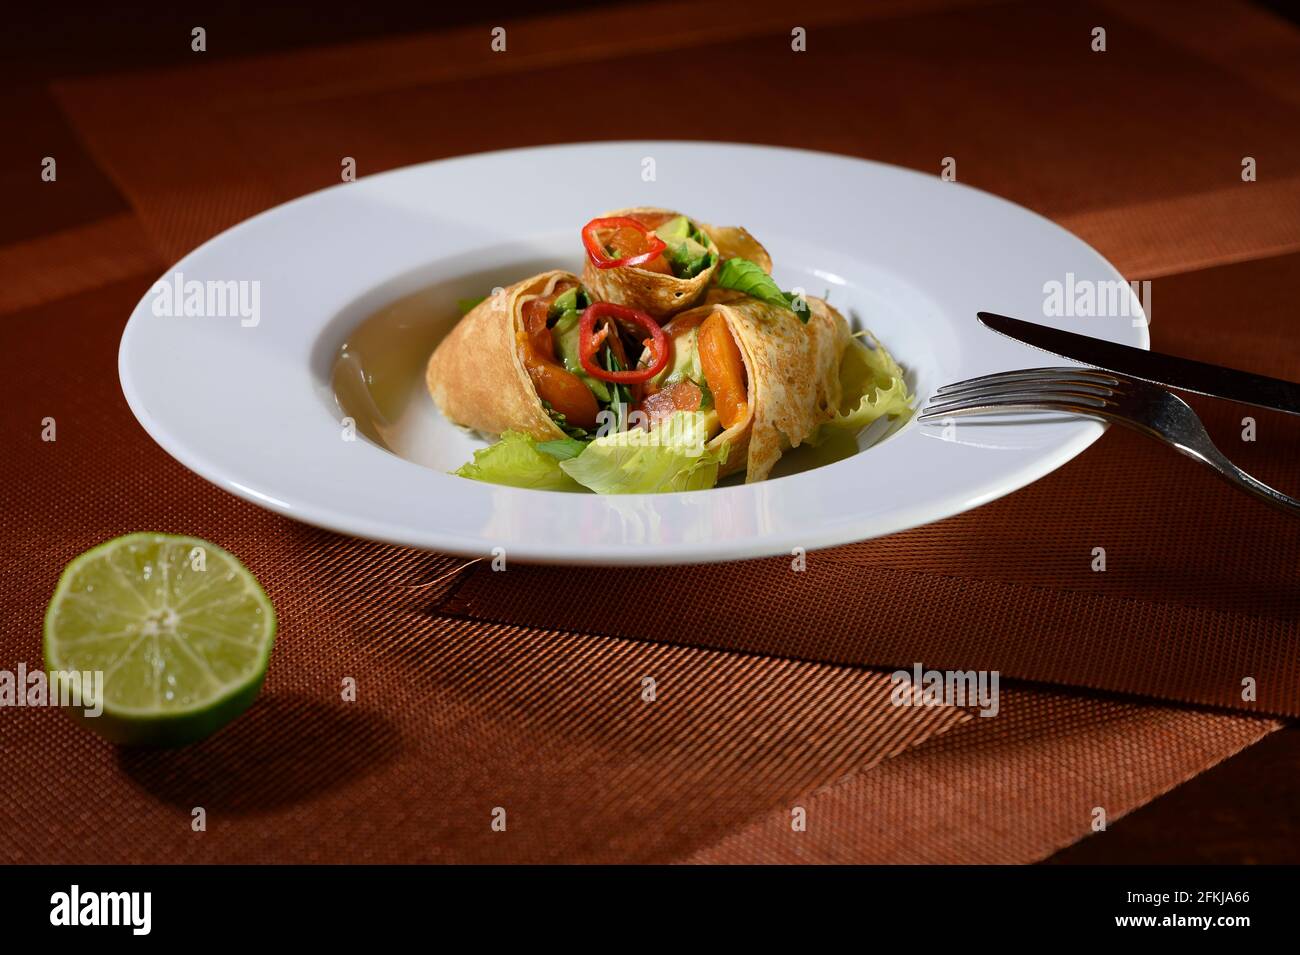 A well prepared plate in a fine dining restaurant. Stock Photo